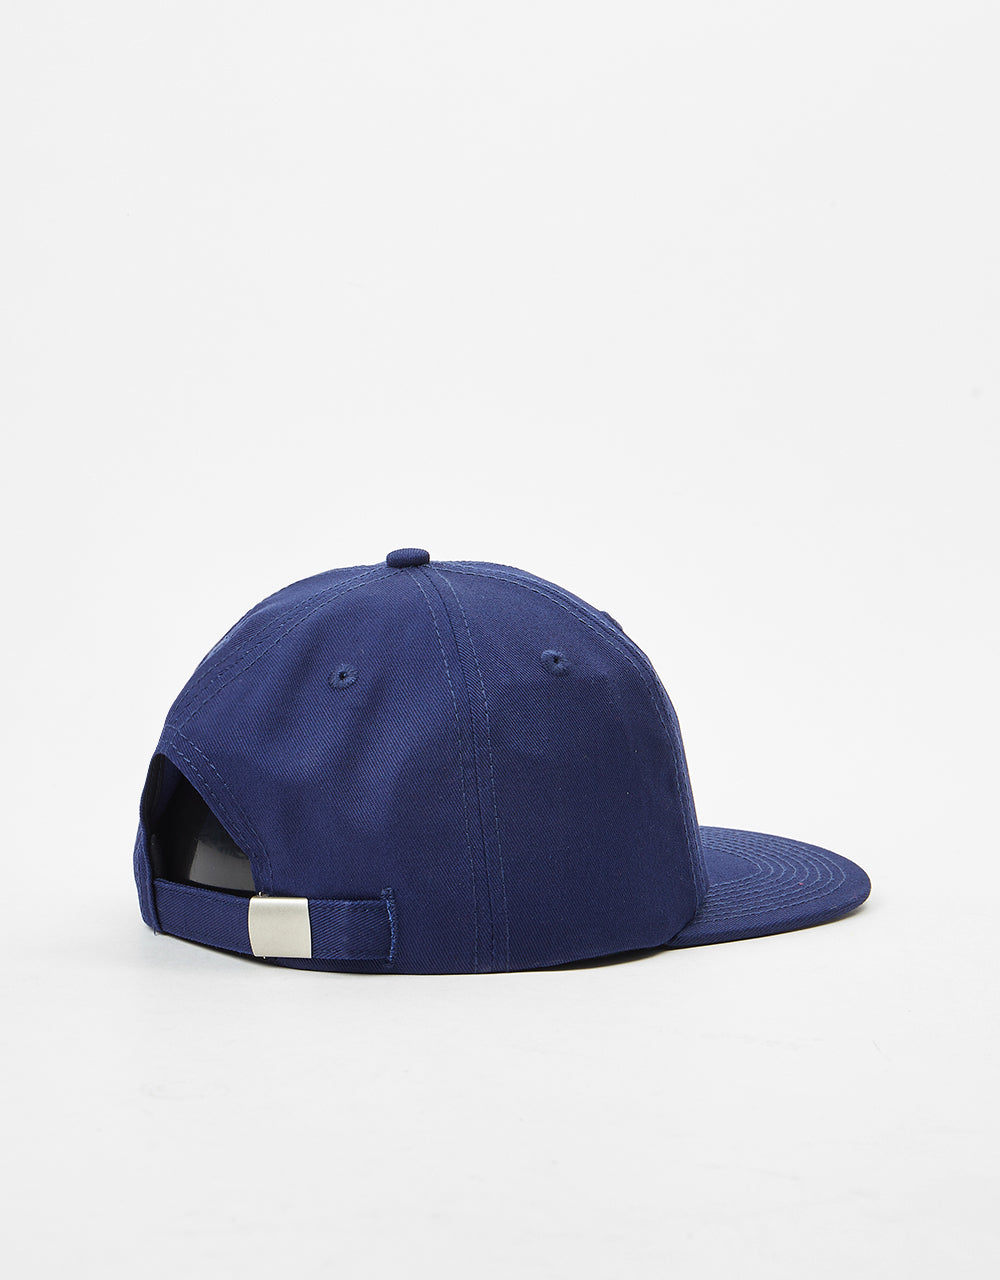 Route One 6 Panel (Unstructured) Cap - Washed Navy